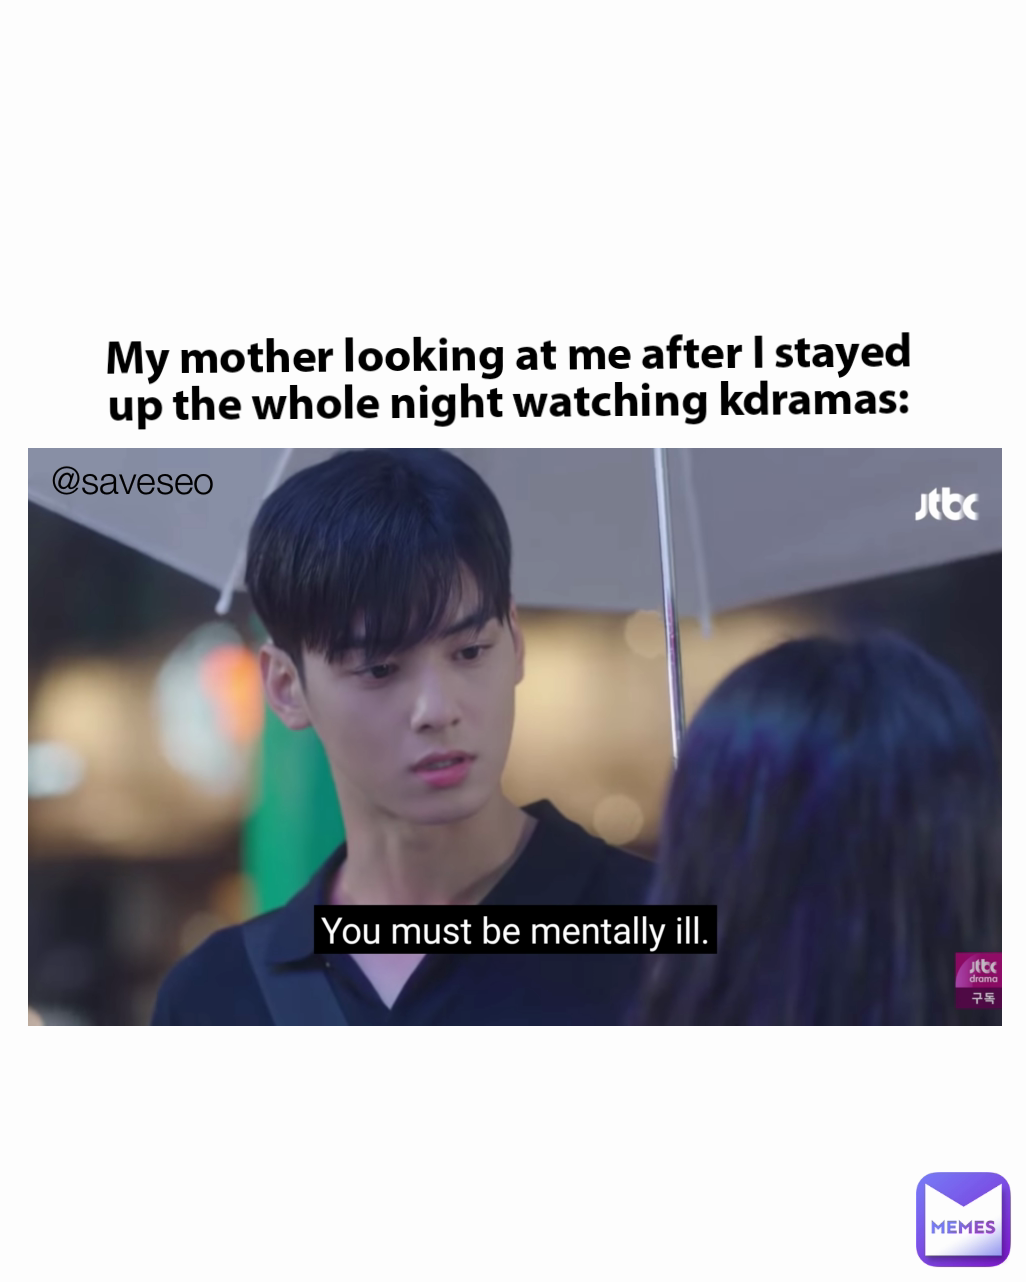 @saveseo My mother looking at me after I stayed up the whole night watching kdramas: